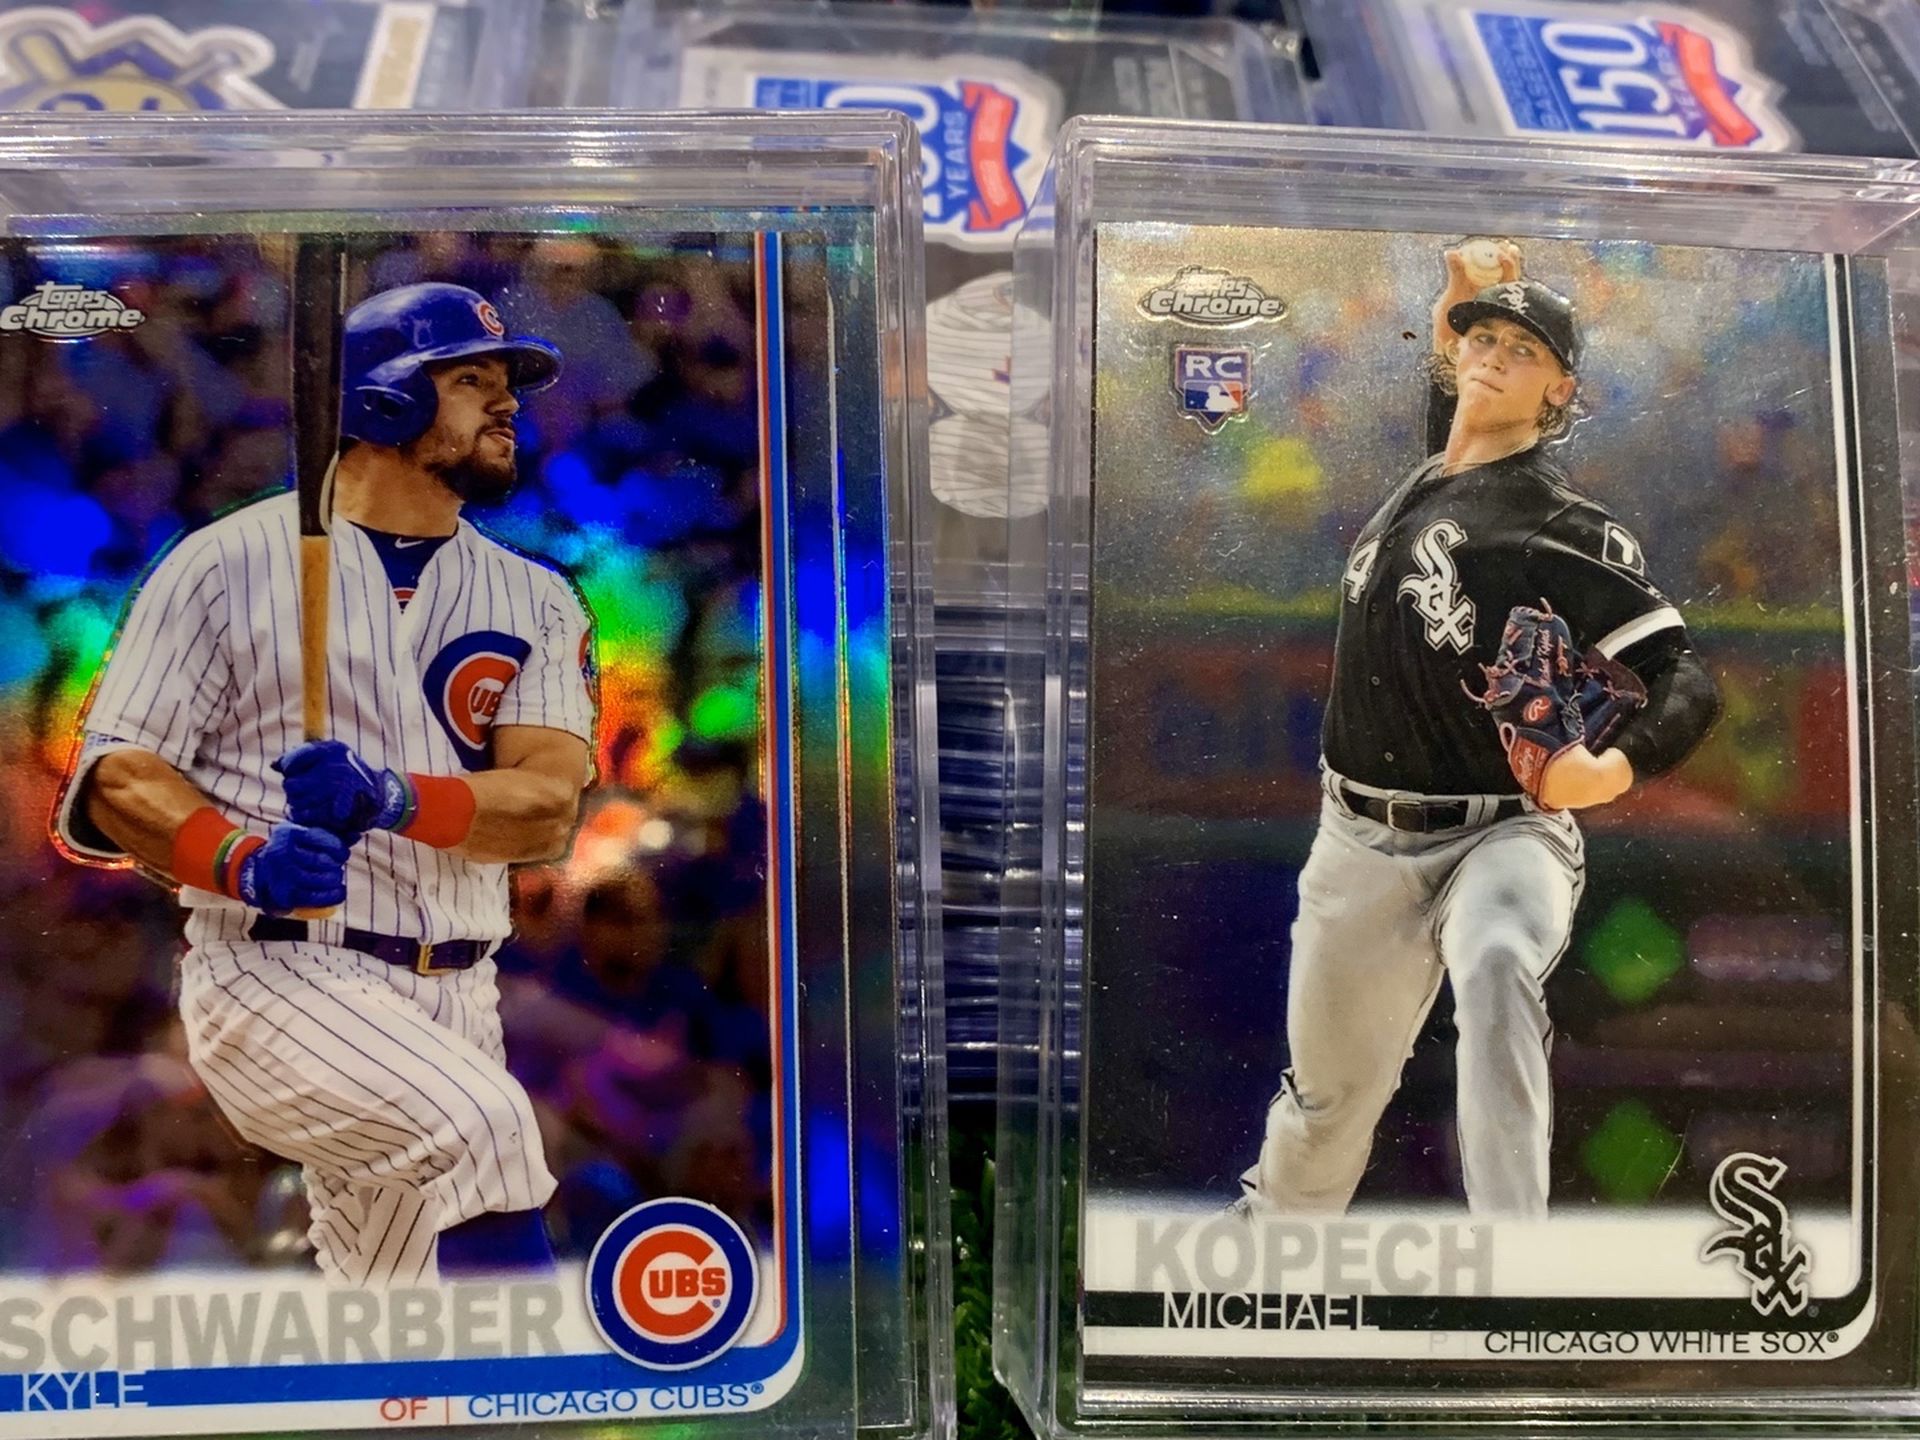 2019 Topps Chrome Refractors And Rookie Baseball Cards.